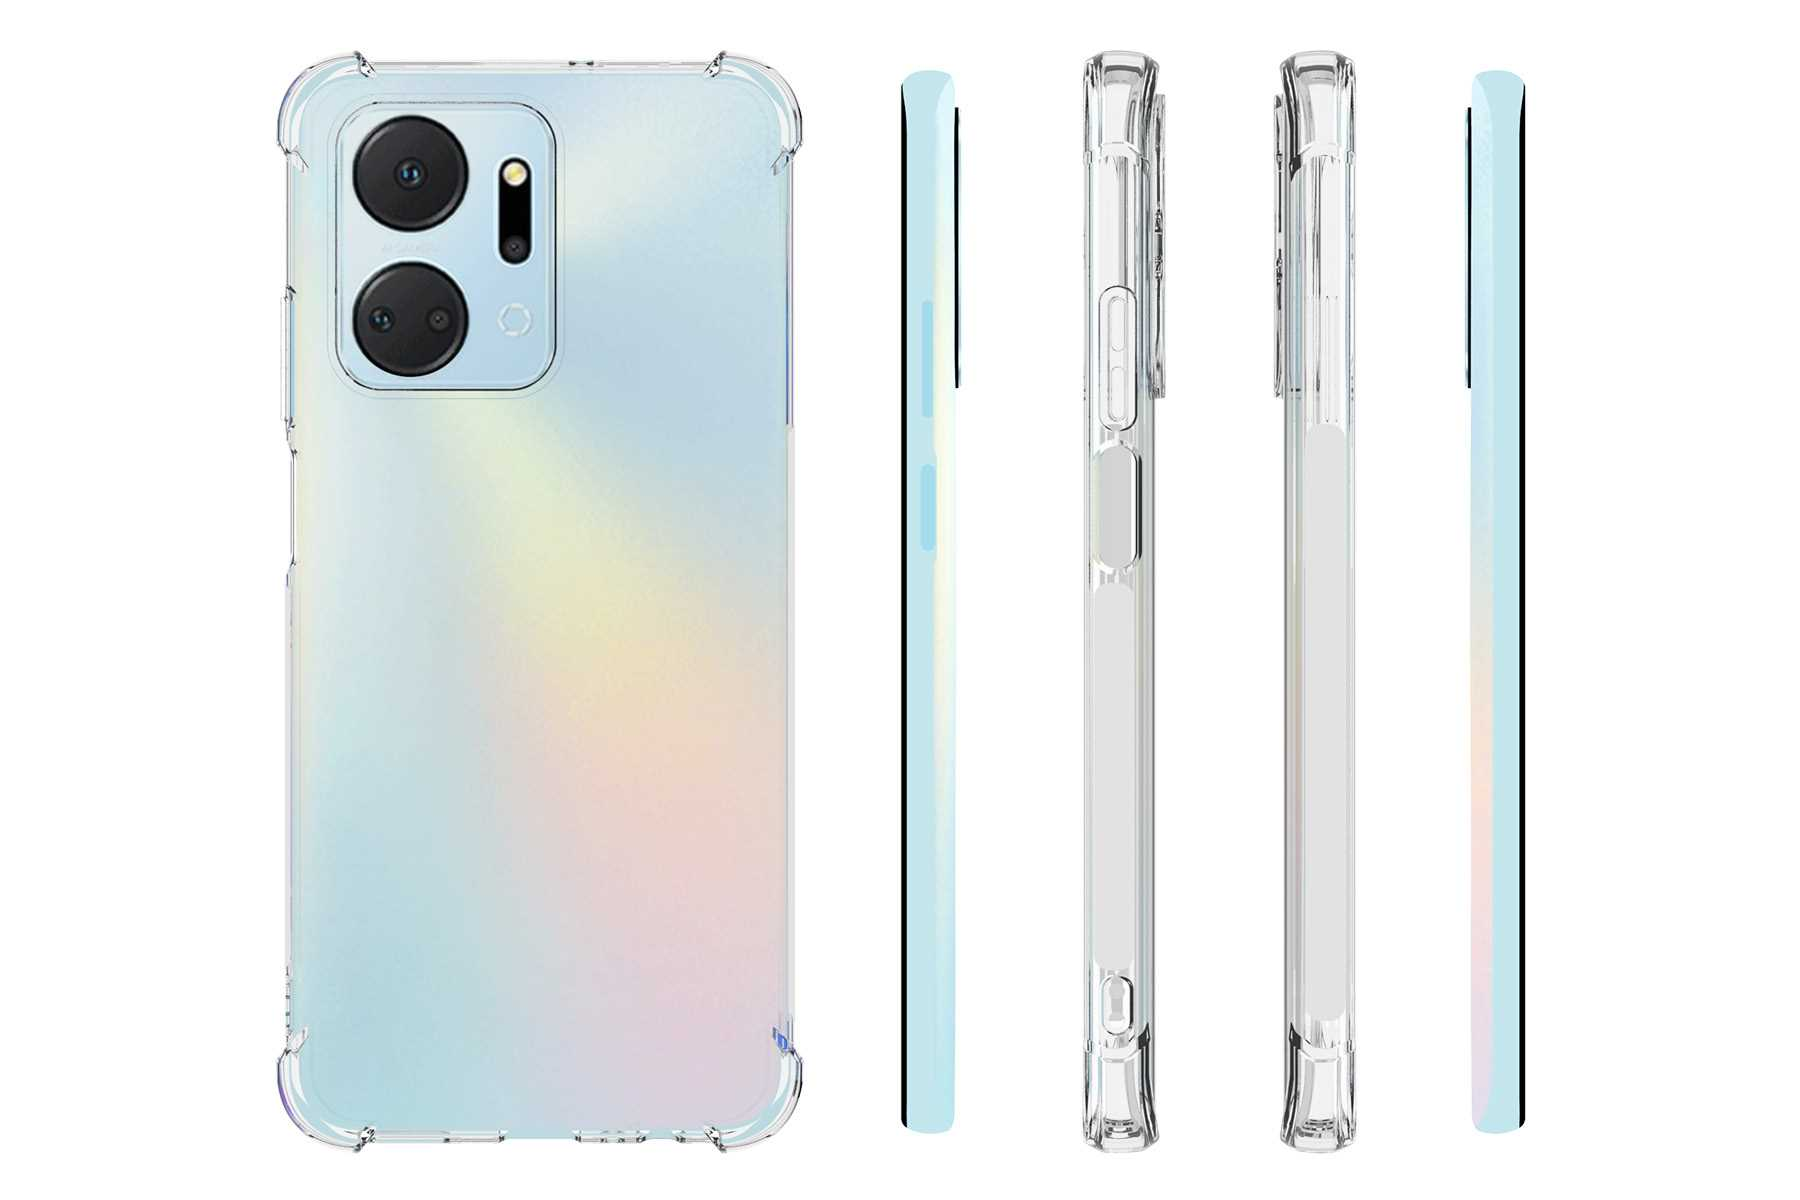 Armor Honor, Backcover, MTB Clear ENERGY Case, Transparent MORE X7A,